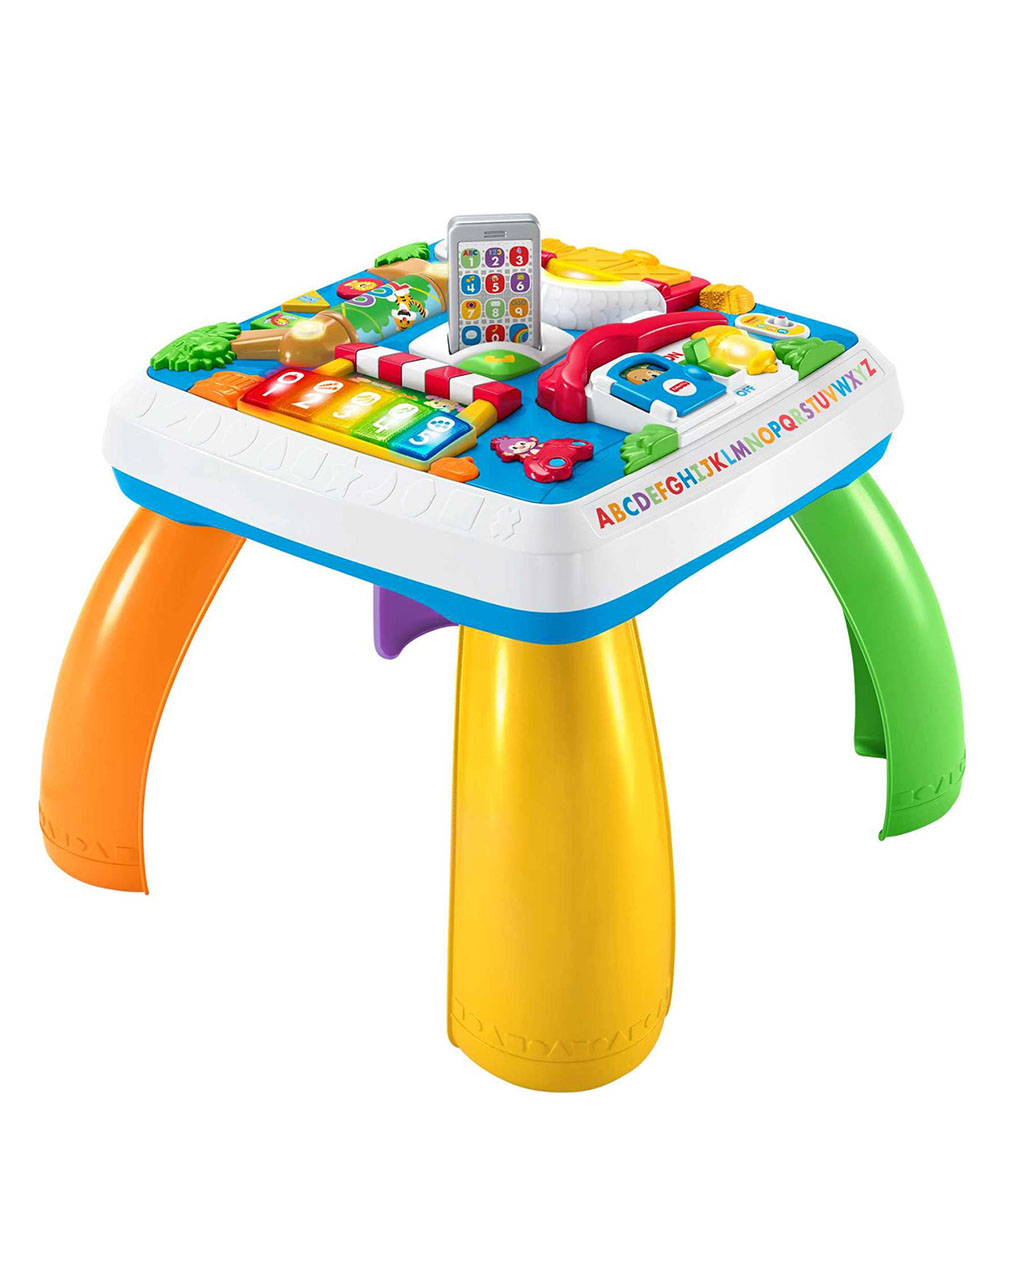 Fisher price laugh & learn εκπαιδευτικό τραπέζι drh43 - Fisher-Price